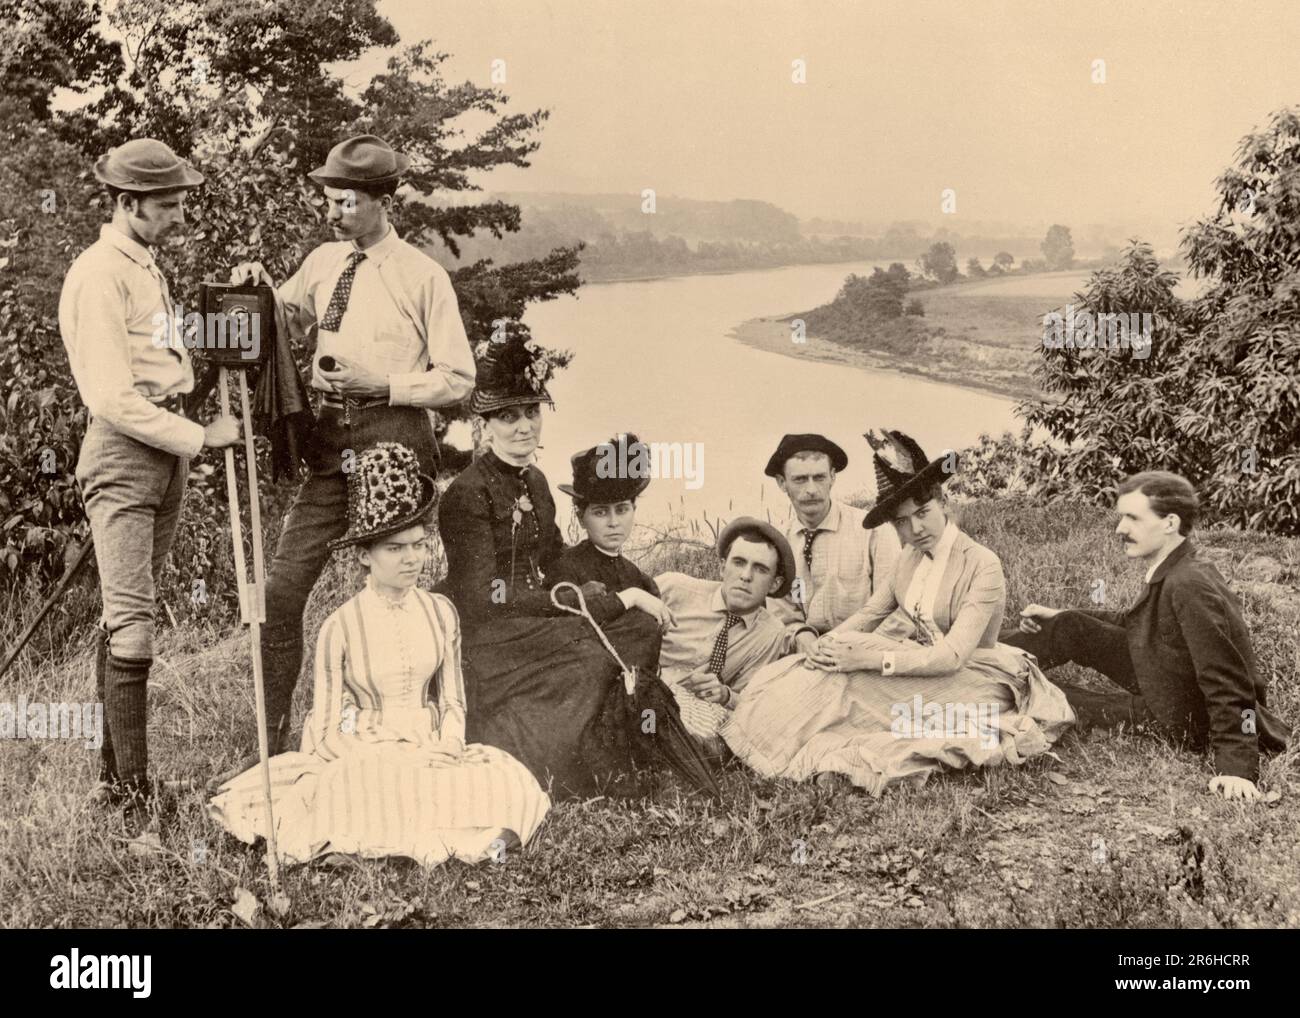 1890s FAMILY GROUP SITTING ON GROUND HILLTOP OVERLOOKING RIVER WHILE PHOTOGRAPHER & ASSISTANT PREPARE CAMERA FOR PICTURE - o2392 SPL001 HARS LADIES PERSONS THOUGHTFUL MALES MIDDLE-AGED 1800s B&W EYE CONTACT MIDDLE-AGED WOMAN HIGH ANGLE ADVENTURE LEISURE PREPARE EXCITEMENT RECREATION OCCUPATIONS ESCAPE FRIENDLY NINE STYLISH SINCERE SOLEMN 9 FOCUSED HILLTOP INTENSE MID-ADULT MID-ADULT MAN MID-ADULT WOMAN OVERLOOKING RELAXATION TOGETHERNESS YOUNG ADULT MAN YOUNG ADULT WOMAN & BLACK AND WHITE CAREFUL CAUCASIAN ETHNICITY EARNEST INTENT OLD FASHIONED Stock Photo